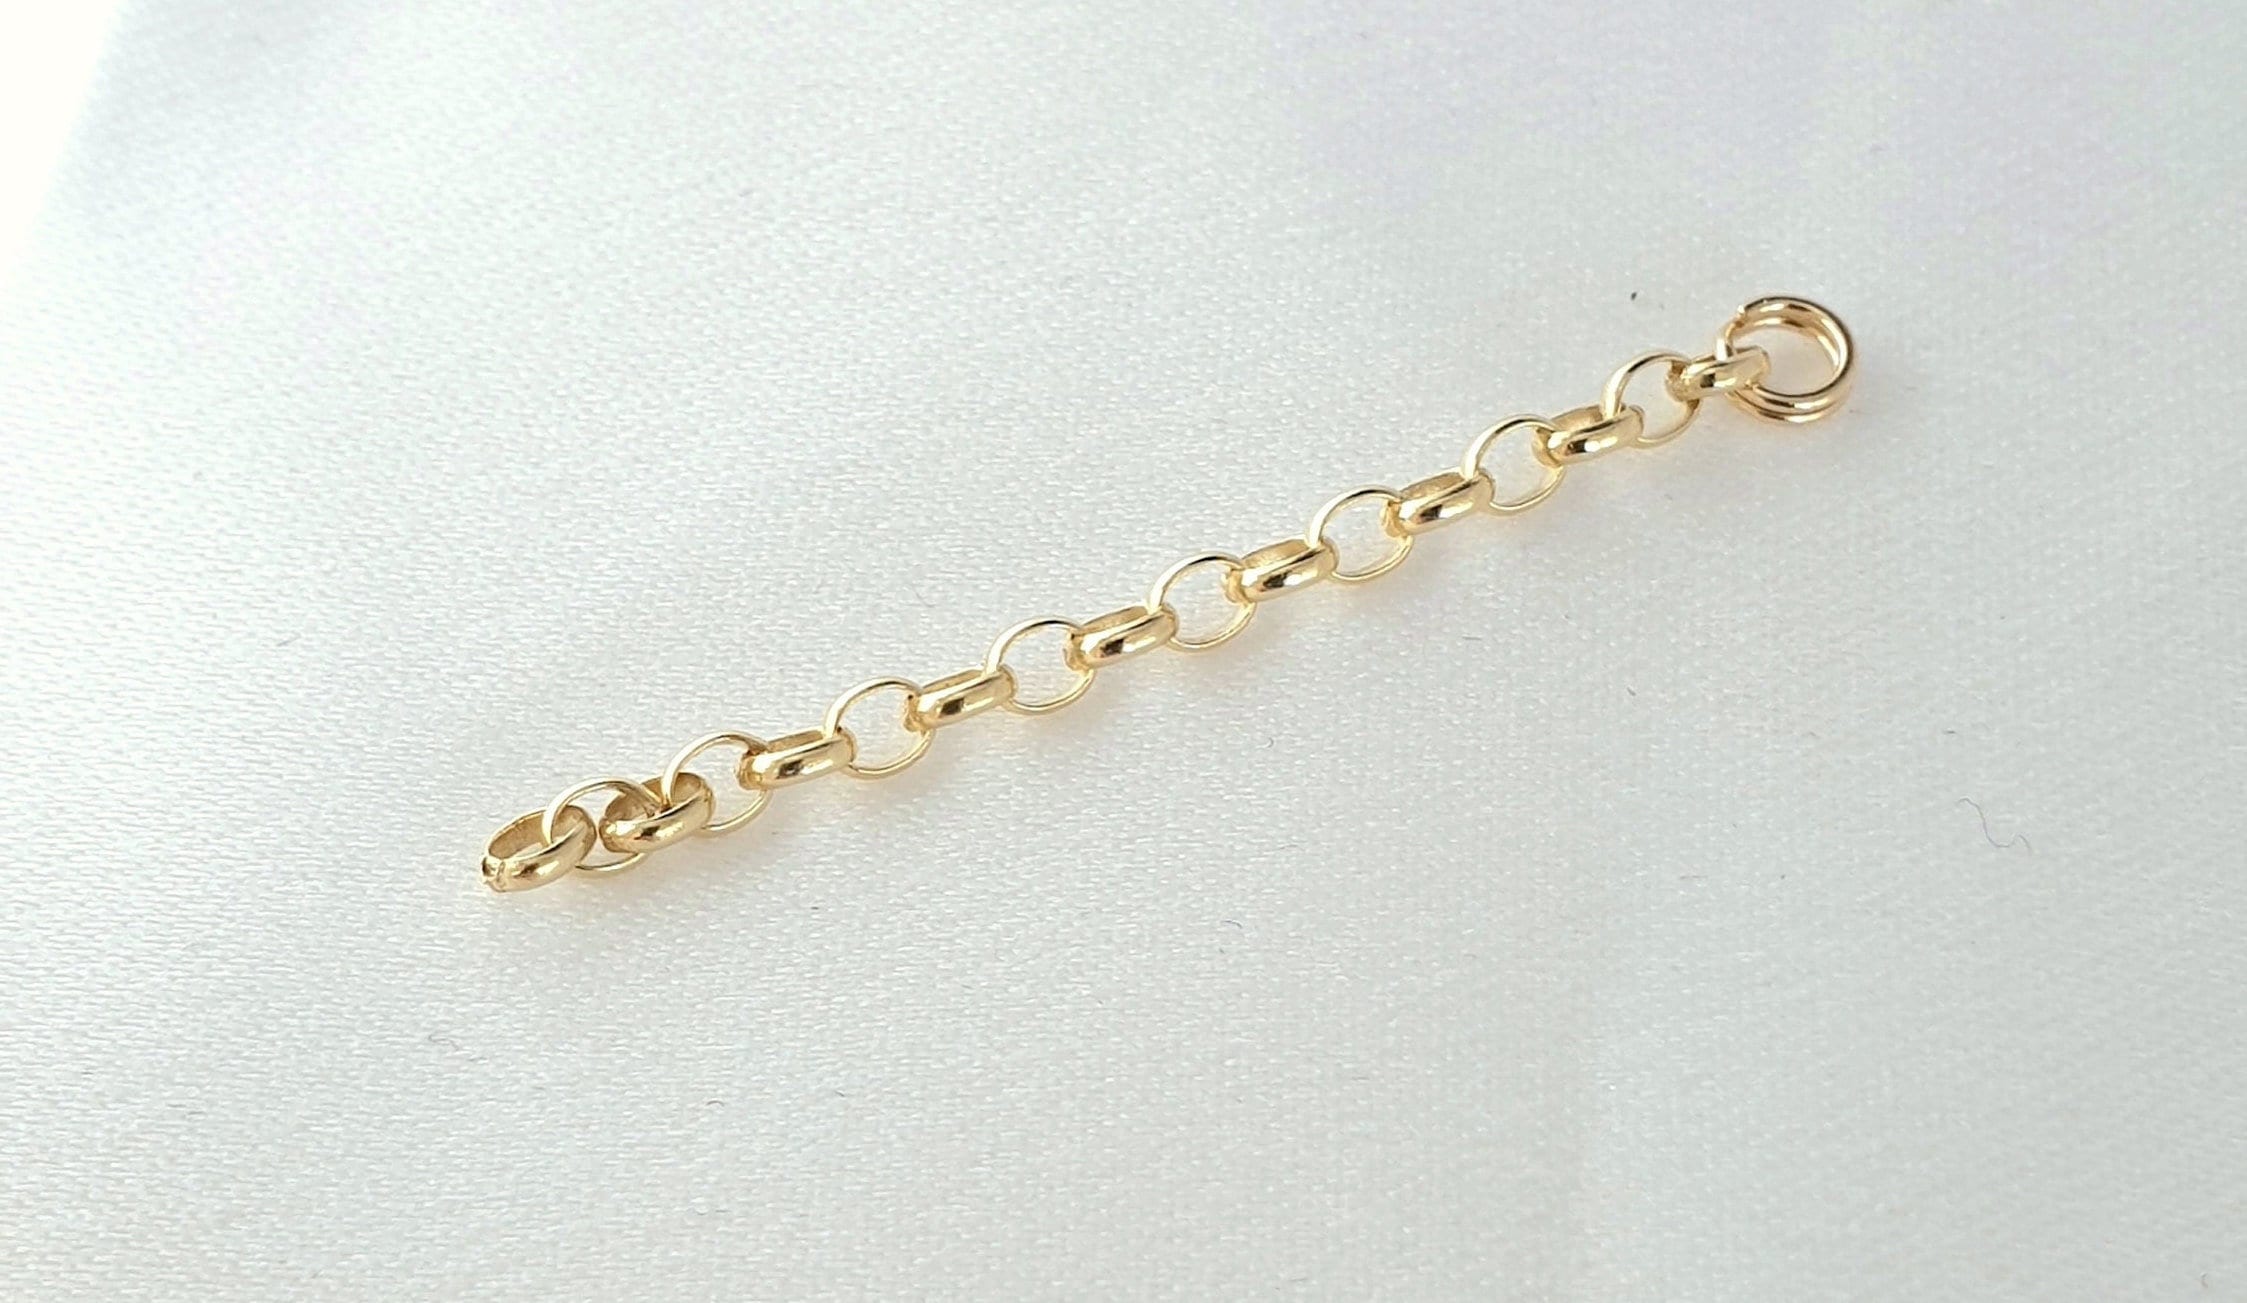 Gold Chain extension, 2 or 3 Inch gold necklace Extender